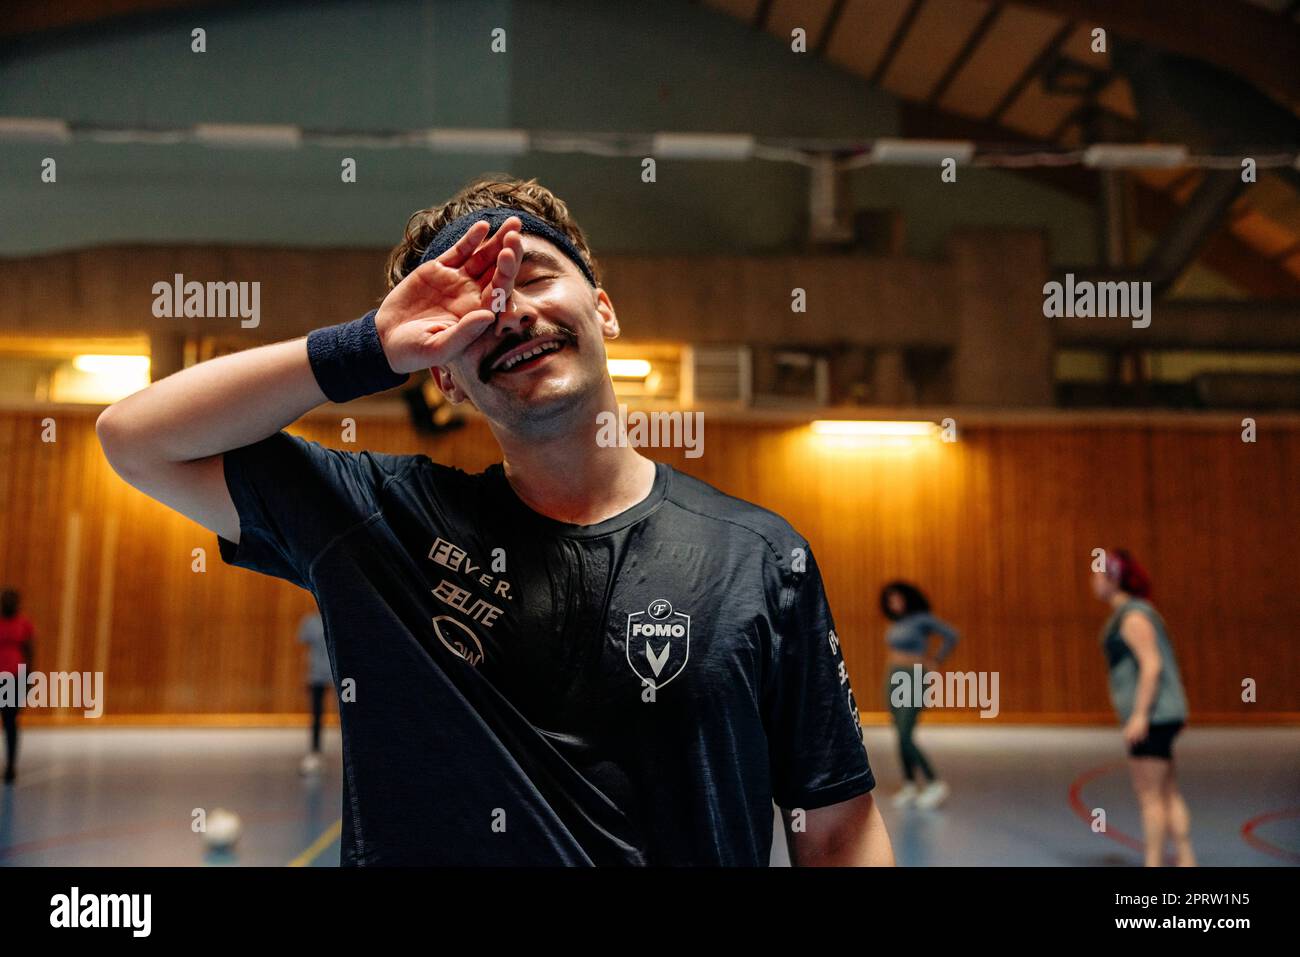 Smiling male athlete rubbing eye at sports court Stock Photo